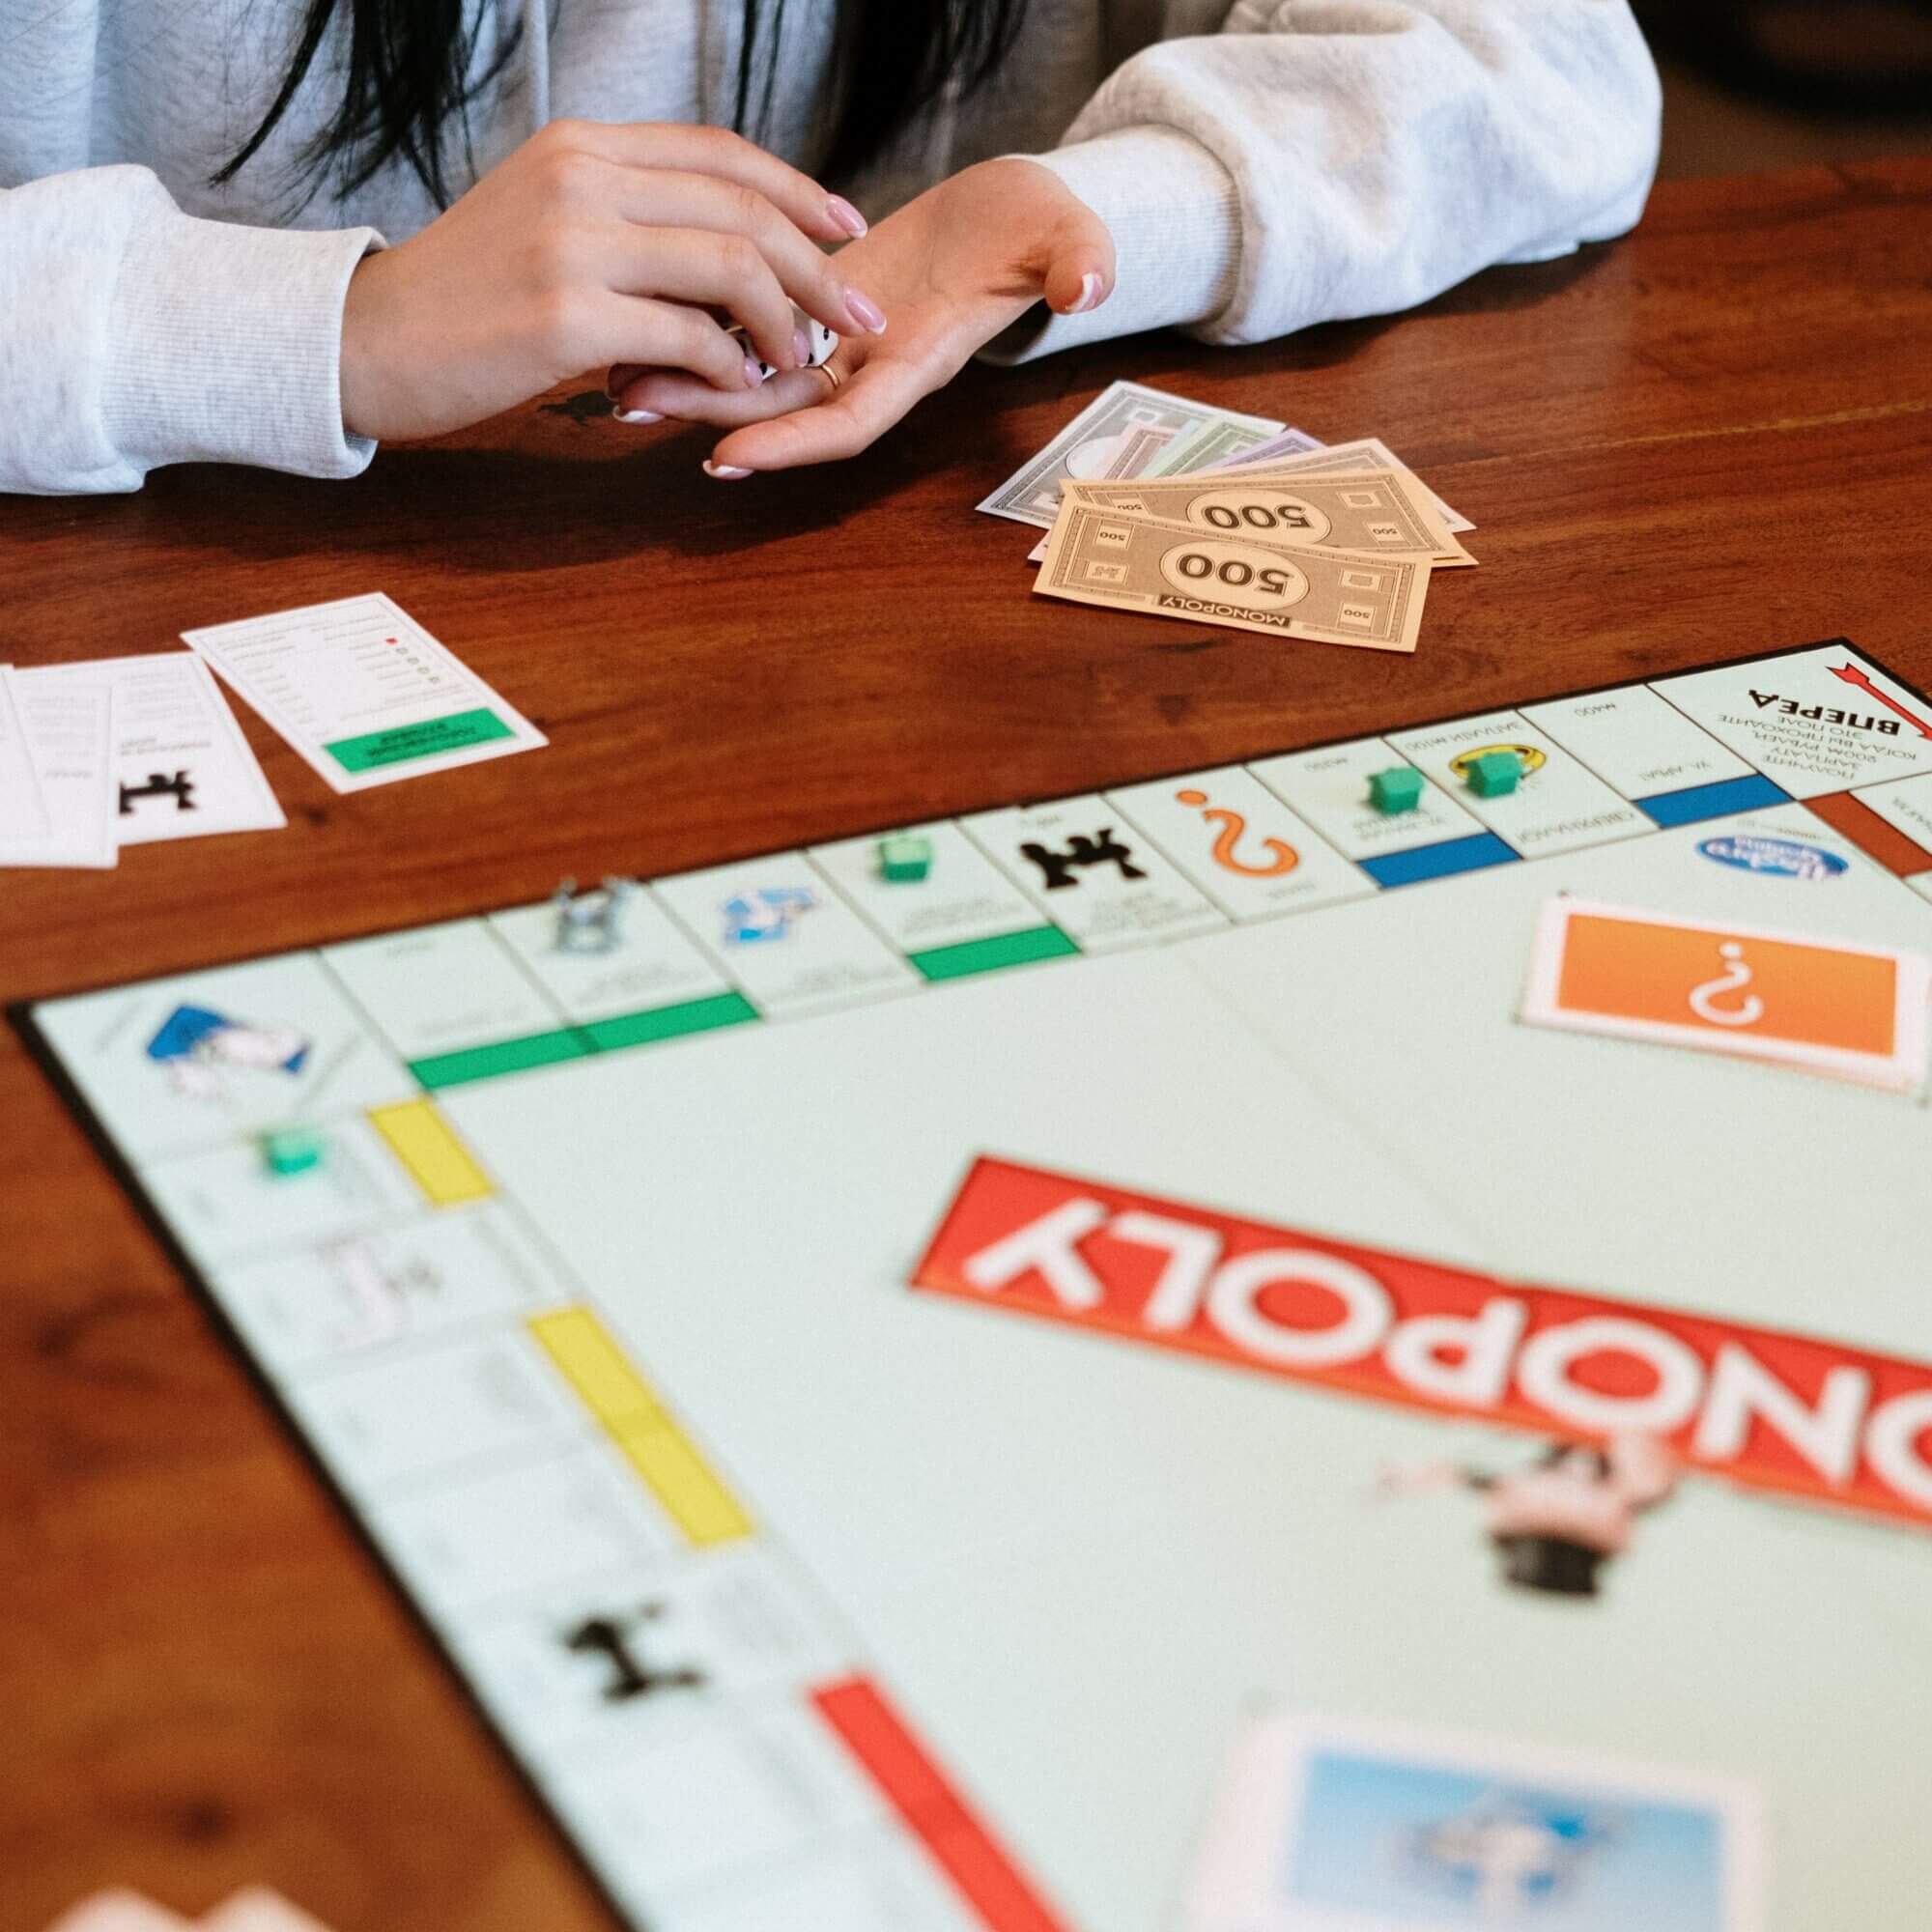 A woman playing monopoly on a table.